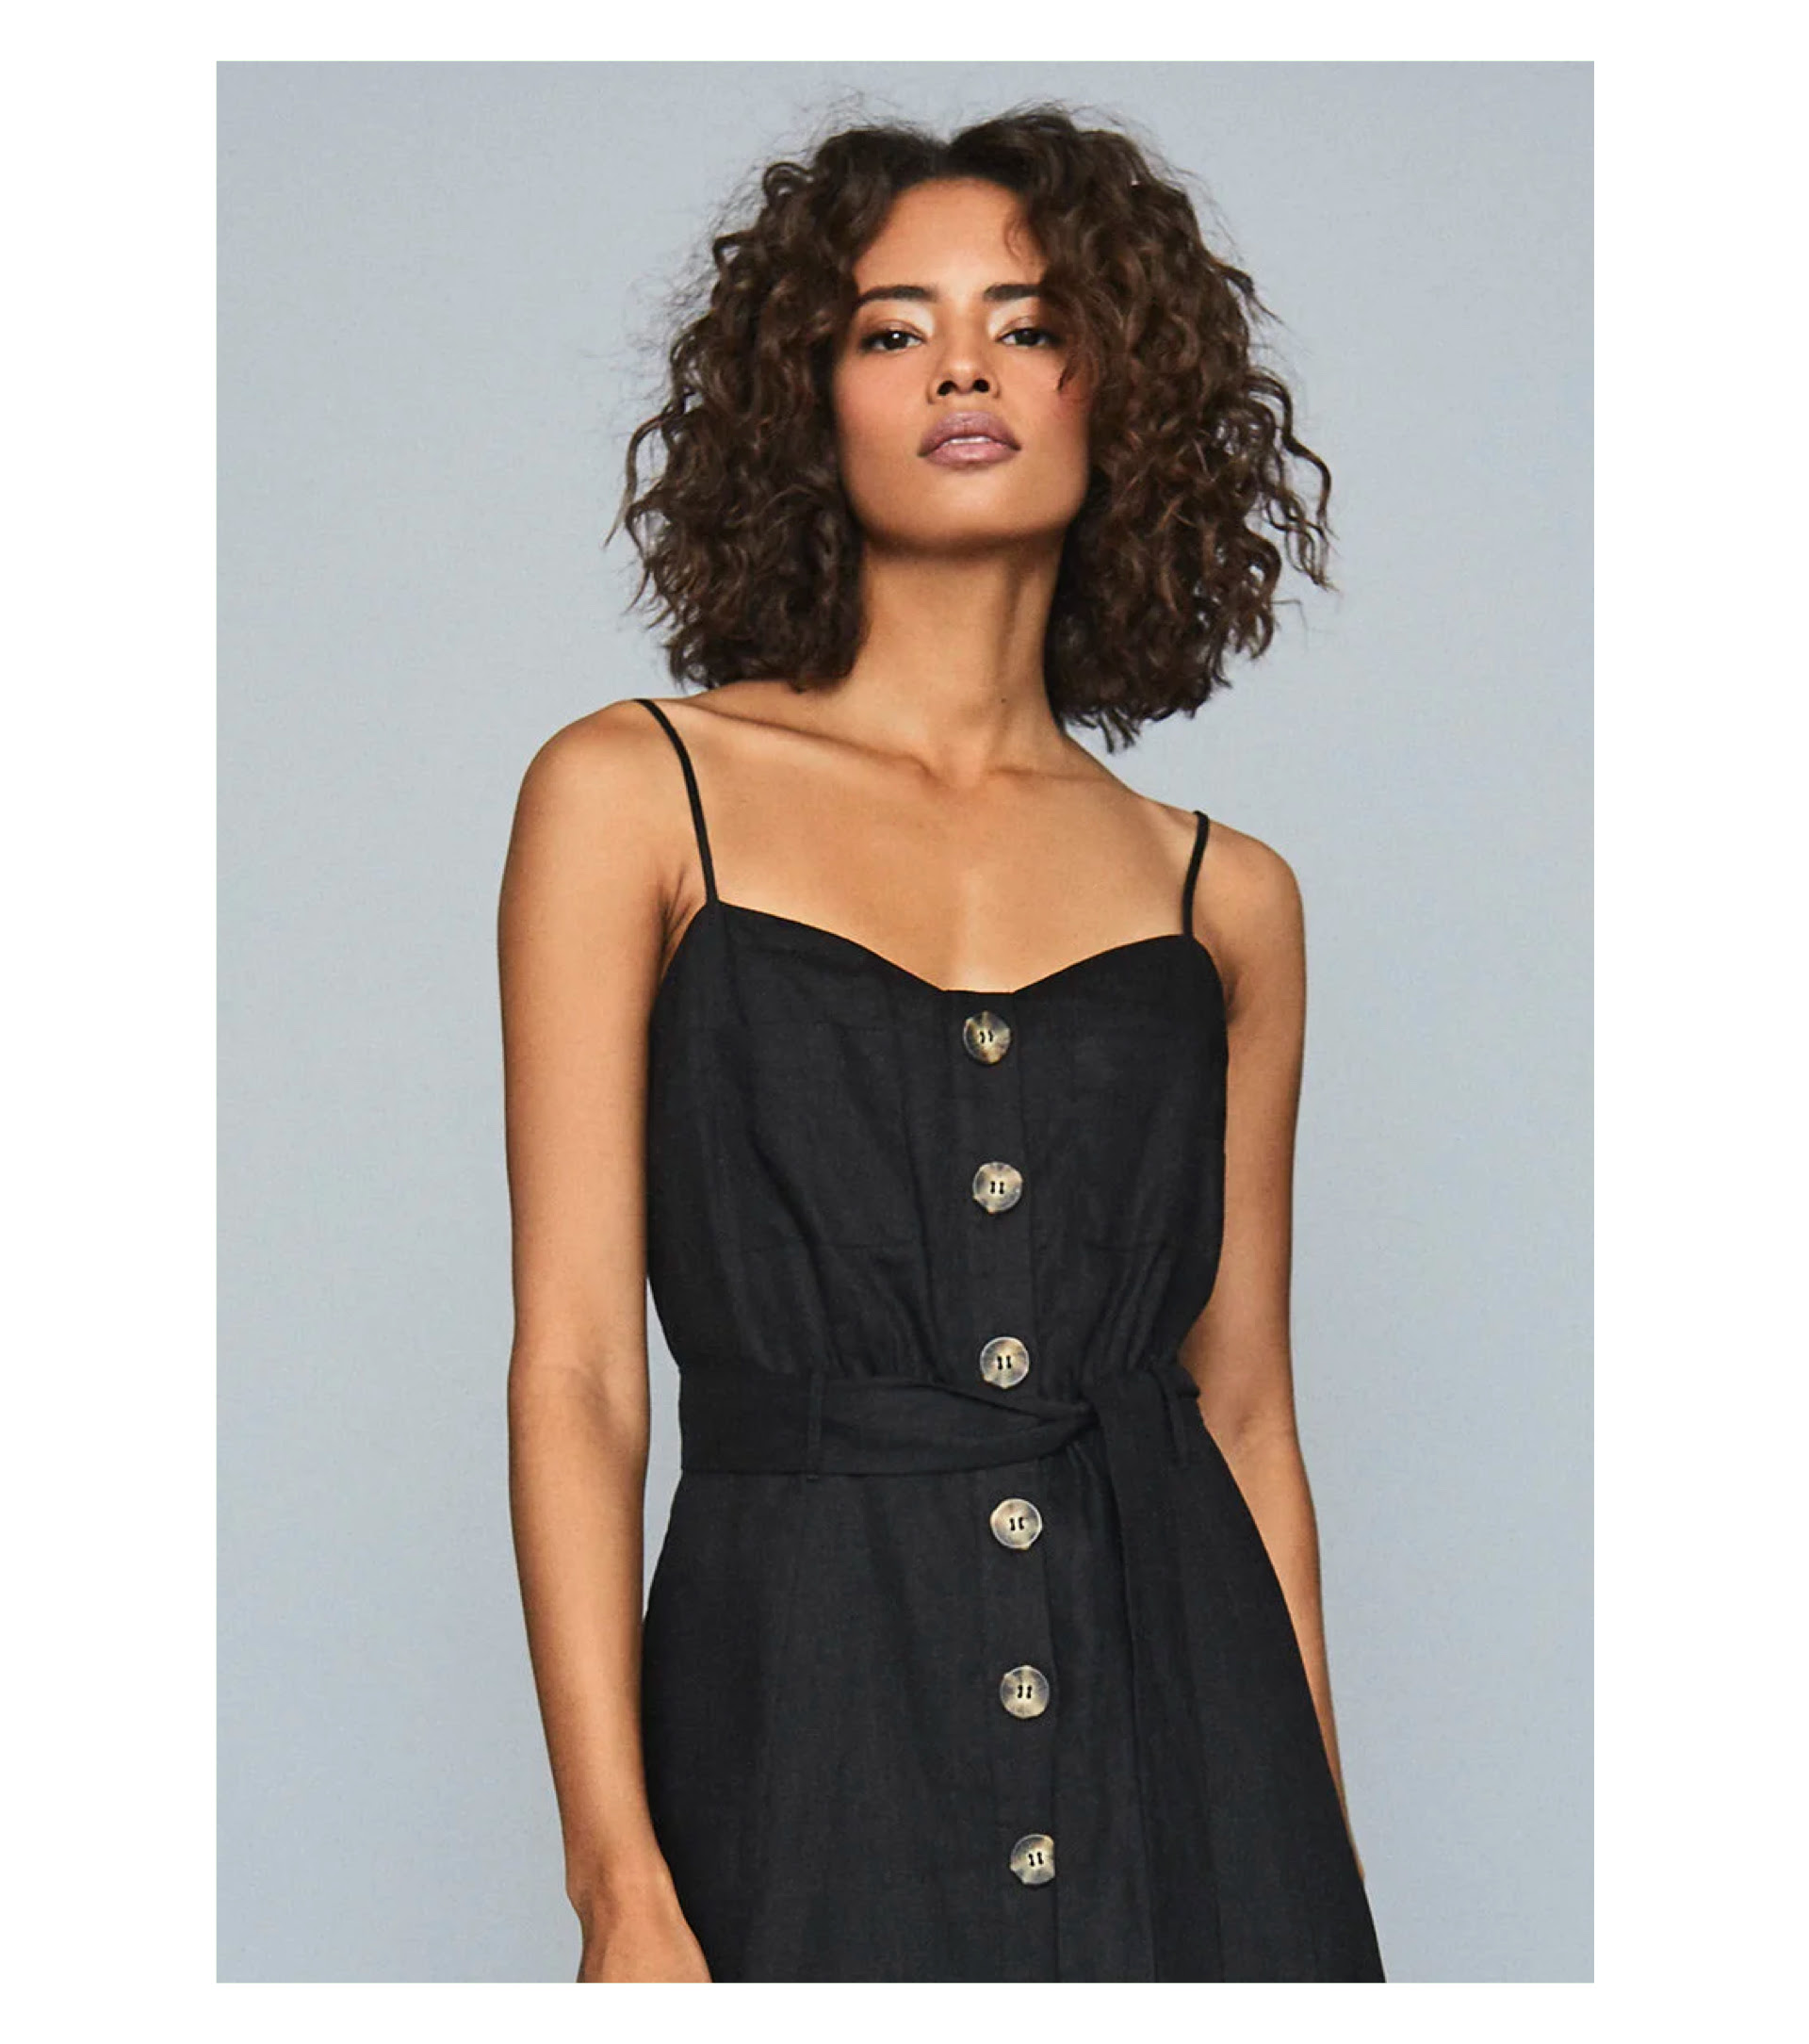 REISS - The Bestselling Dresses & Jumpsuits